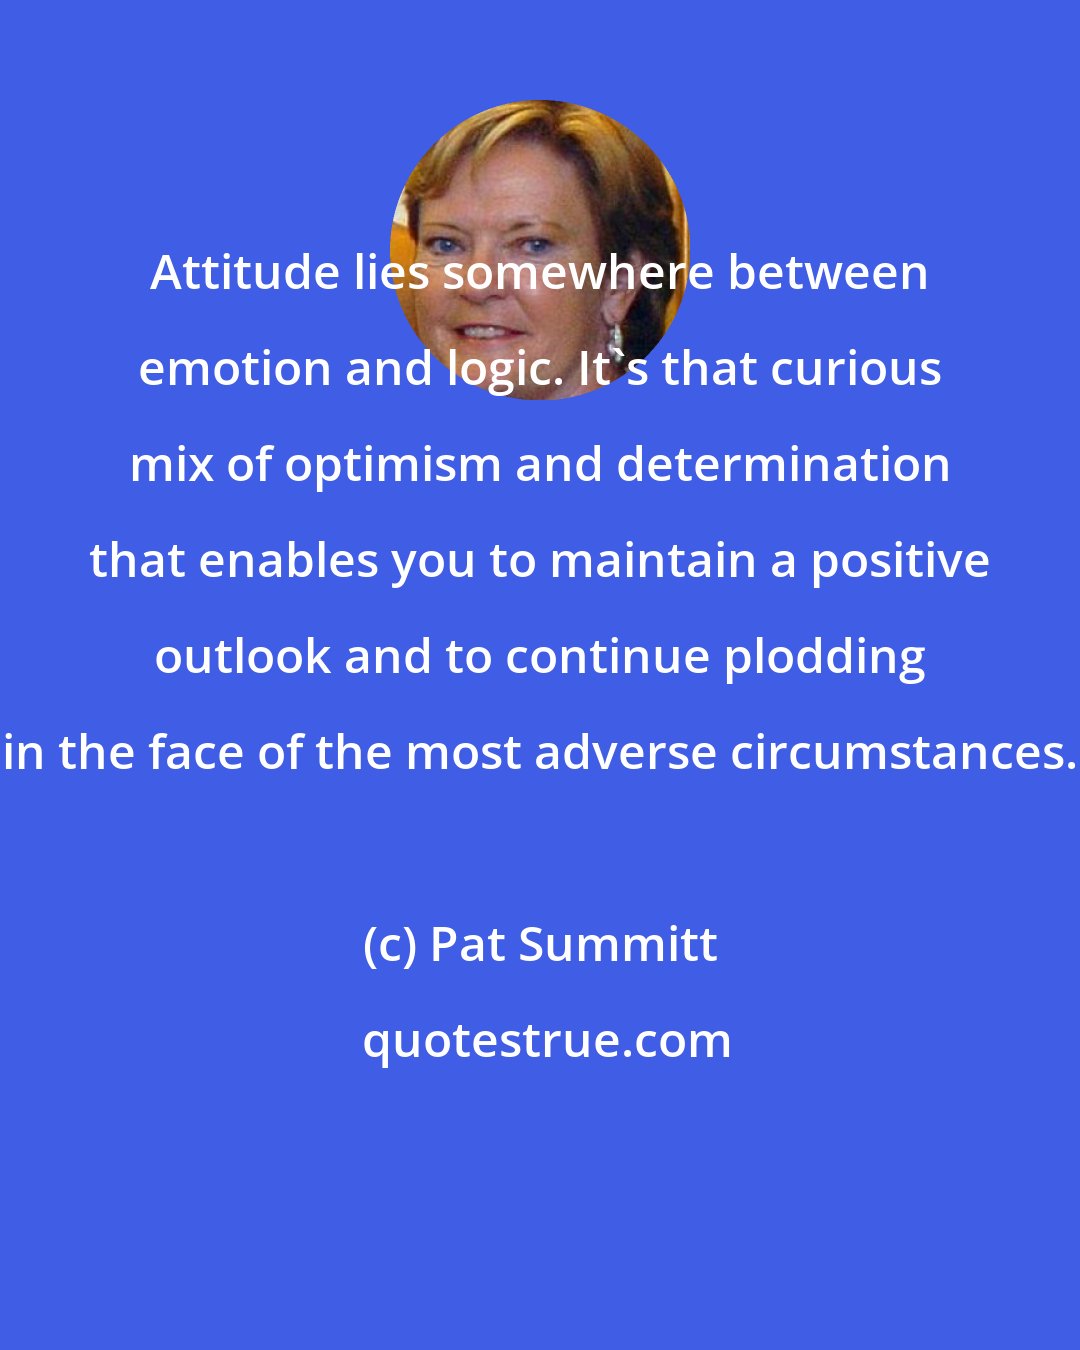 Pat Summitt: Attitude lies somewhere between emotion and logic. It's that curious mix of optimism and determination that enables you to maintain a positive outlook and to continue plodding in the face of the most adverse circumstances.